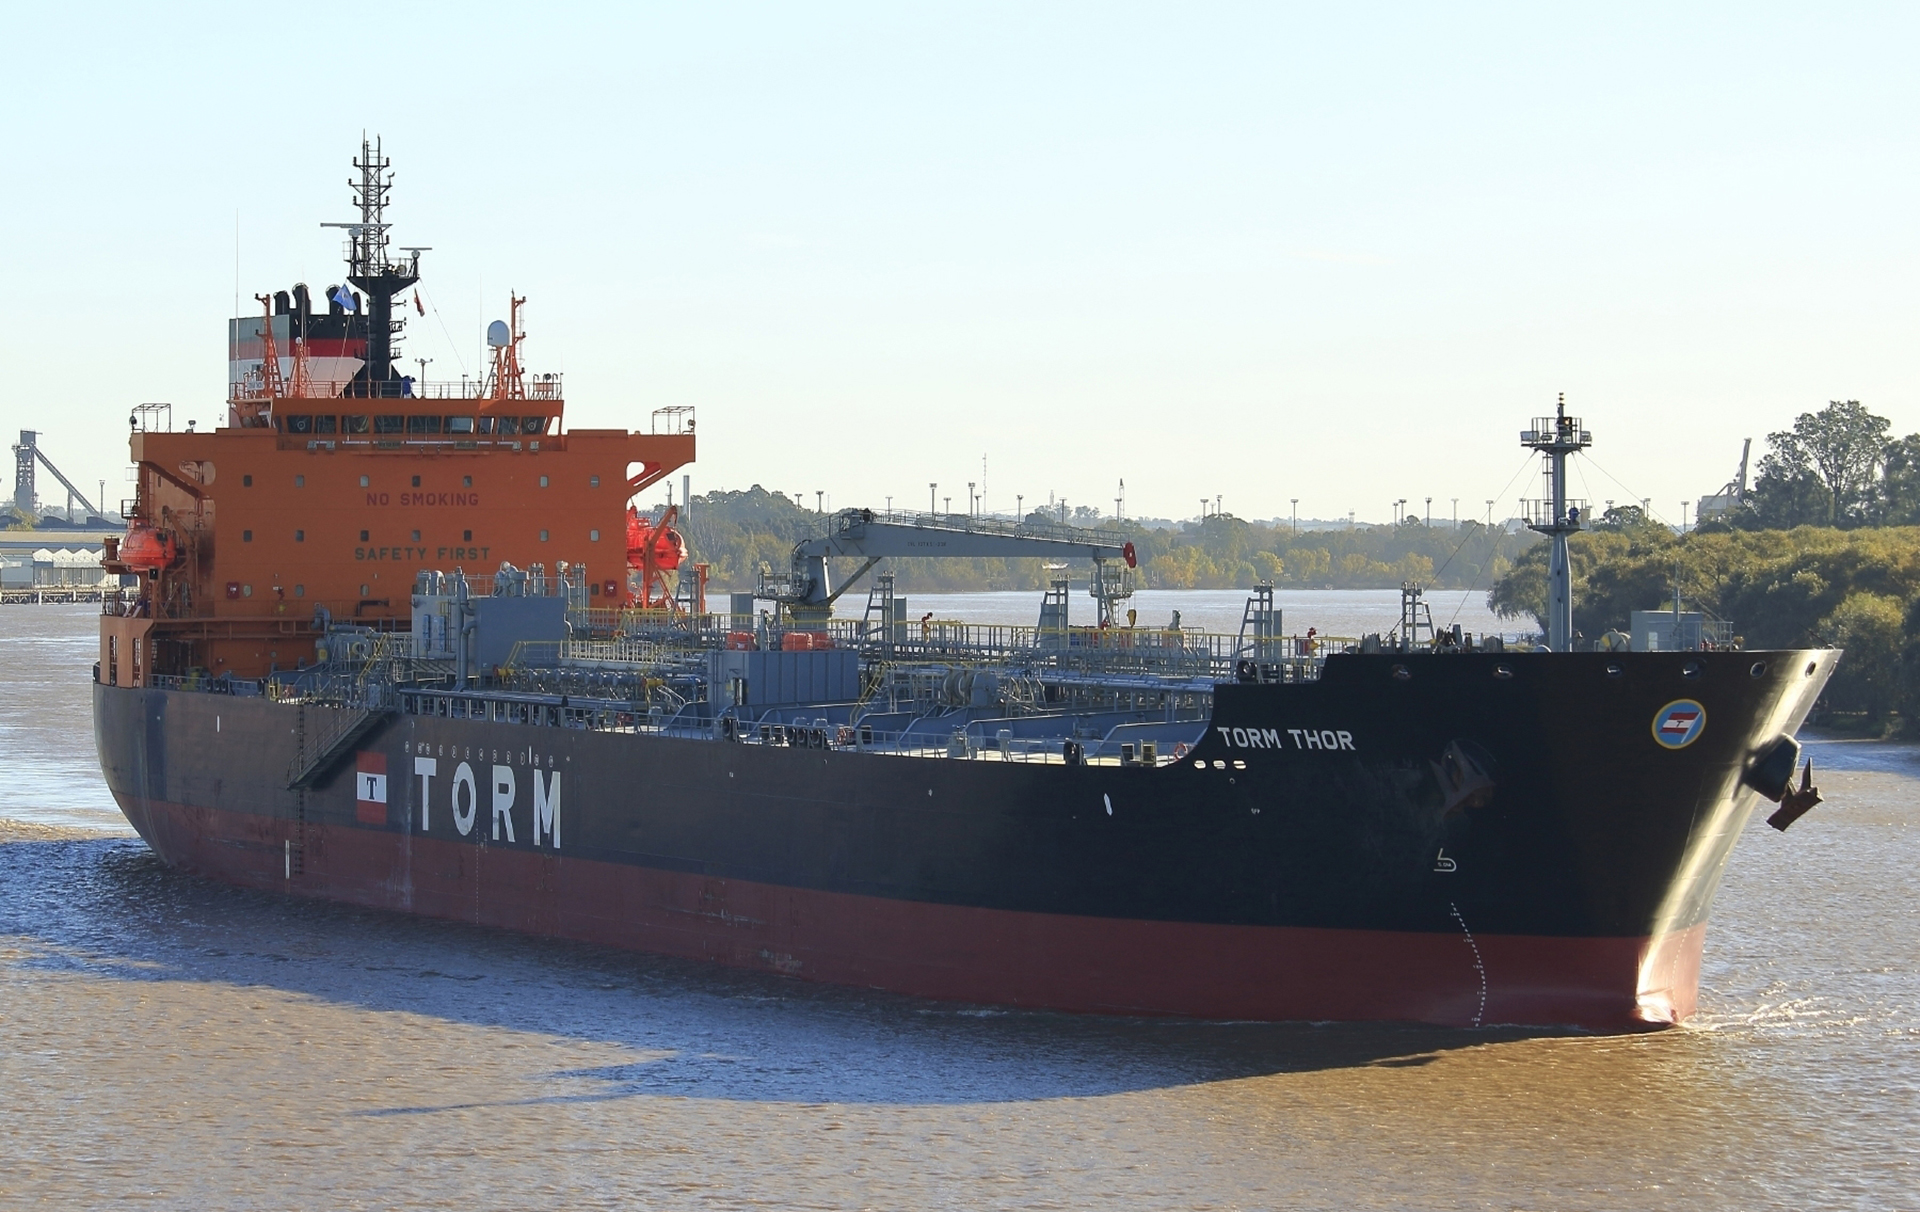 SEACOR to bring 3 tankers into Tanker Security Program, AMO fleet